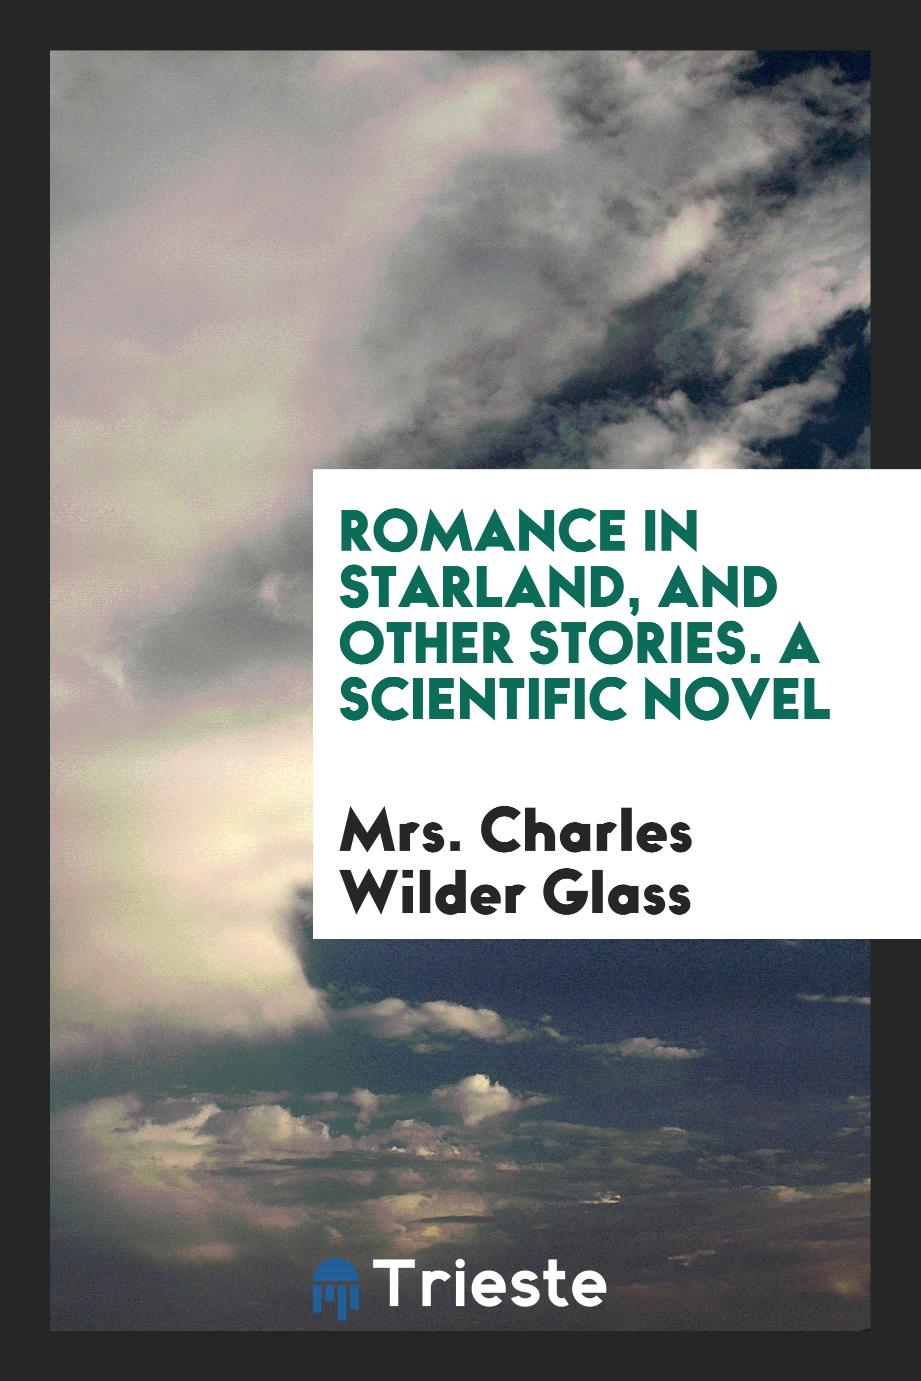 Romance in Starland, and Other Stories. A Scientific Novel